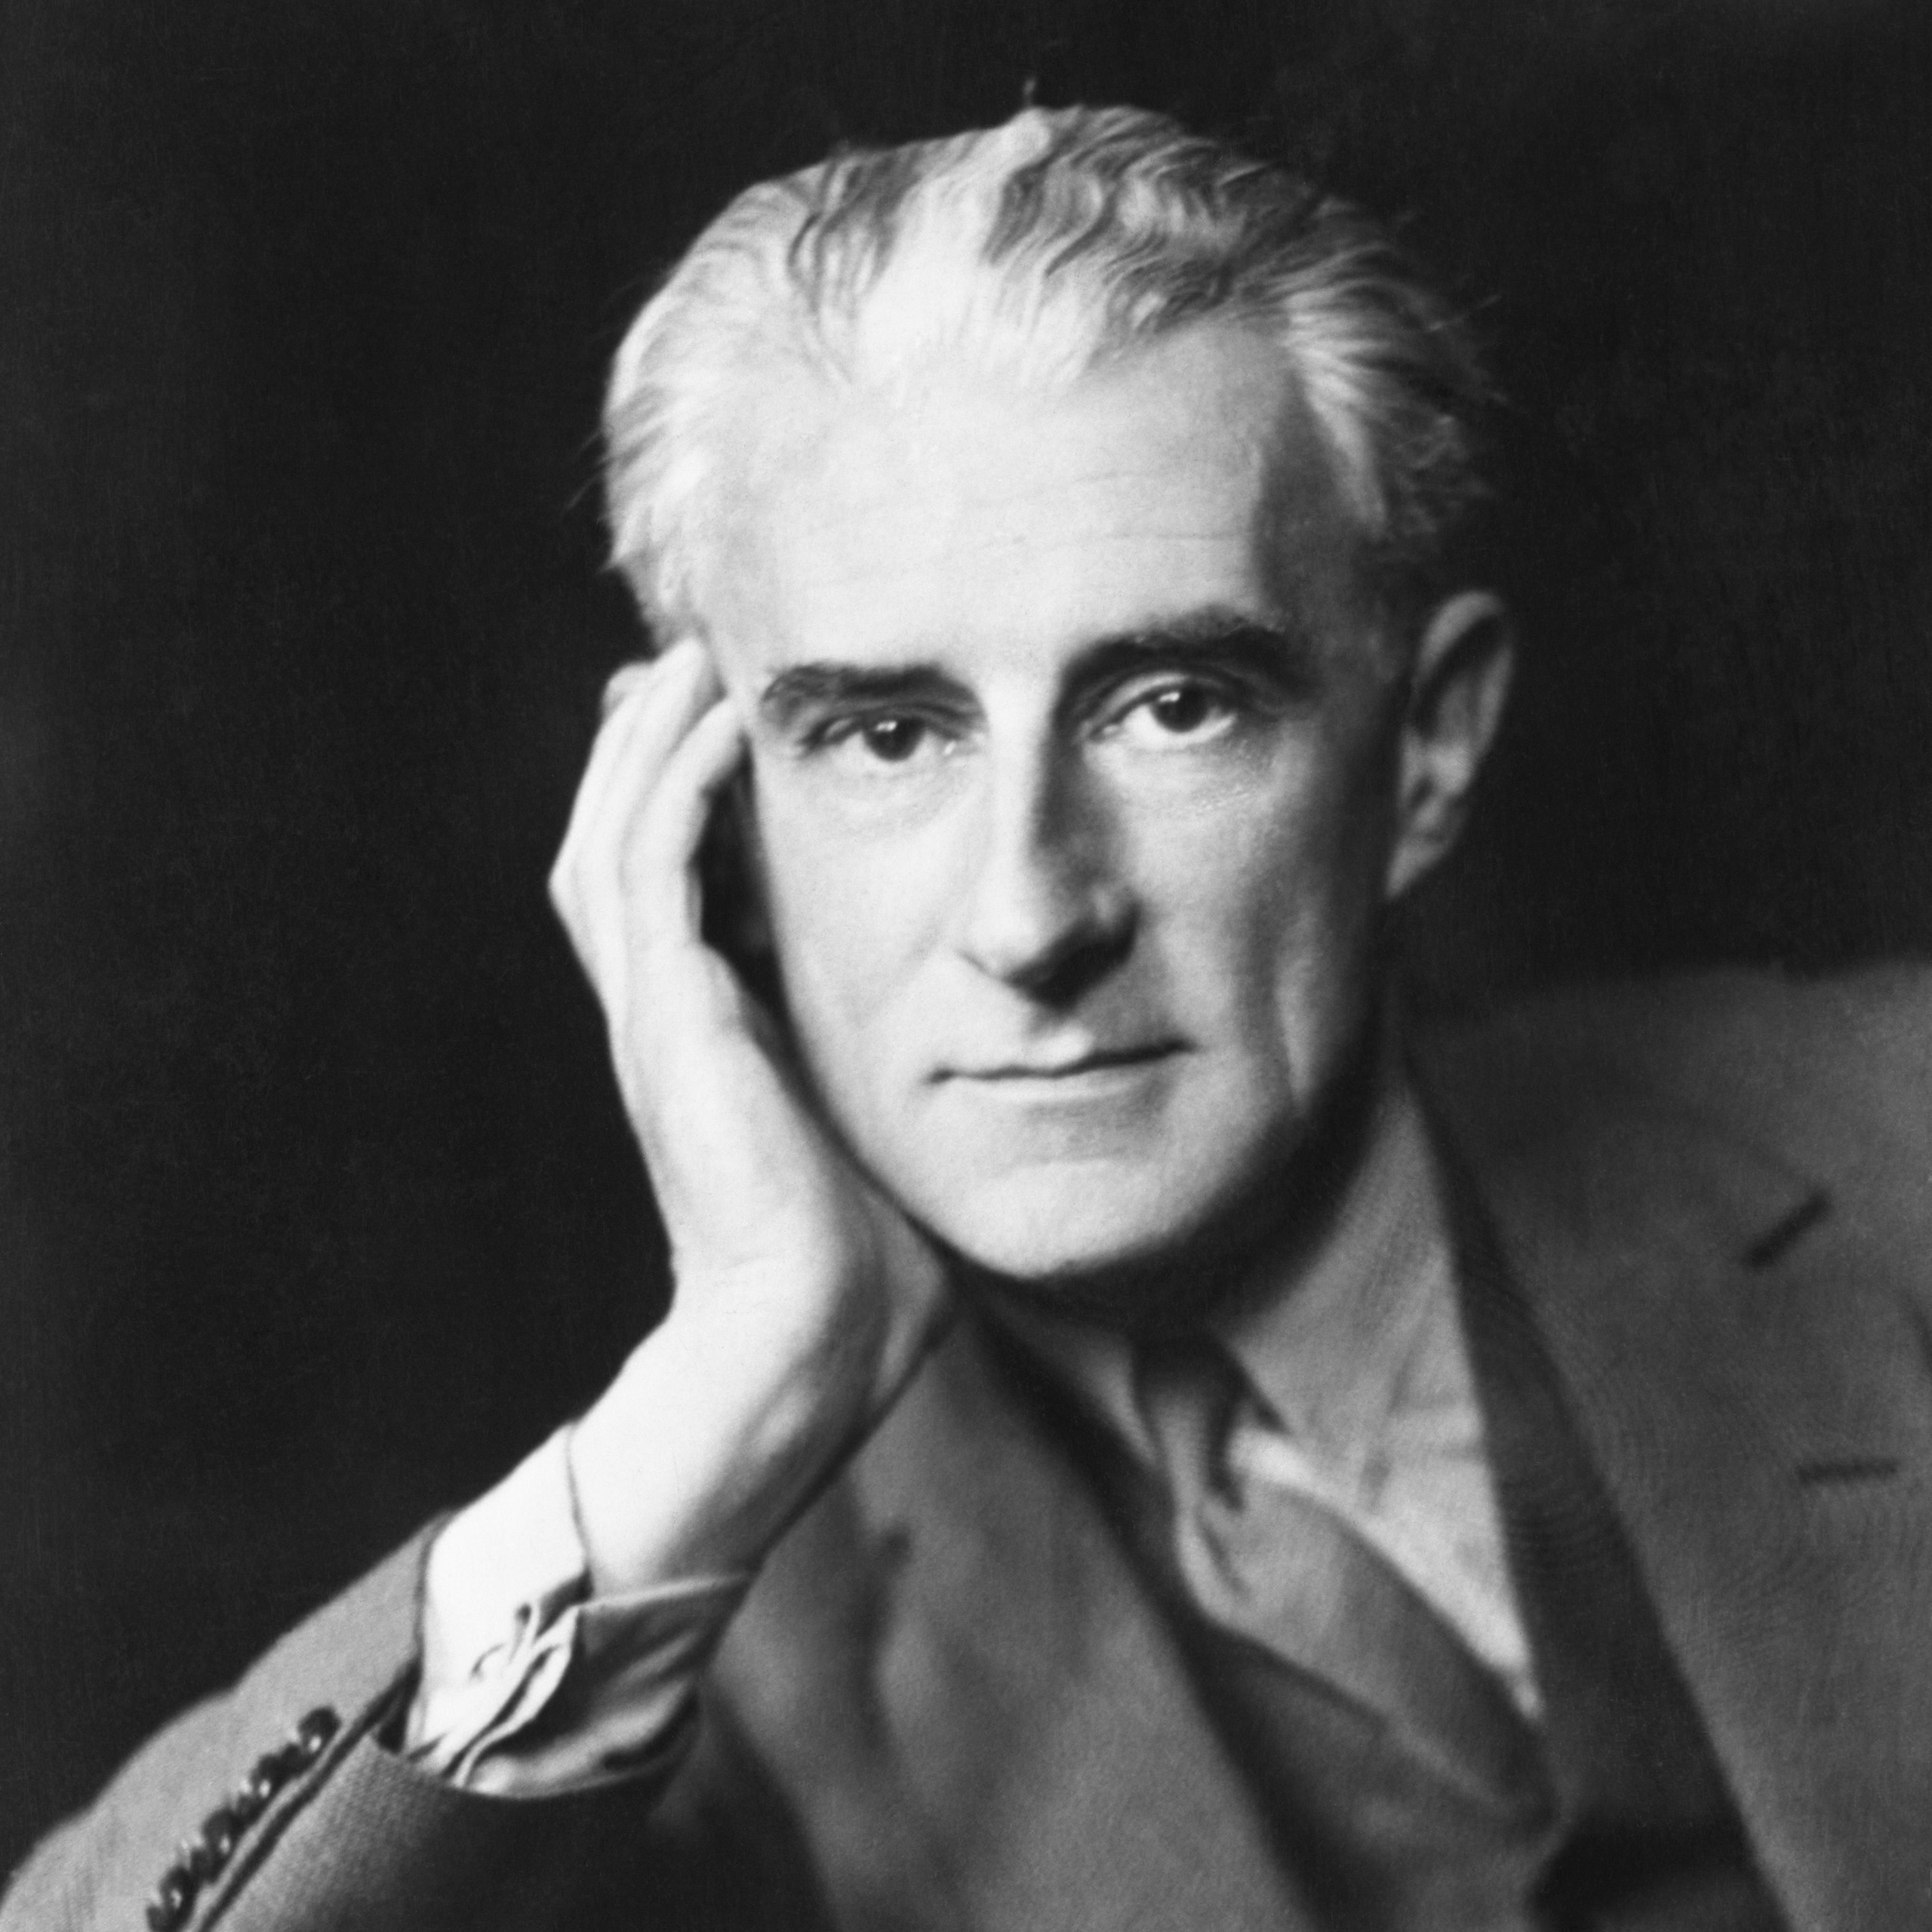 Music Appreciation Series with Dr. Edward Markward: Maurice Ravel and the Dance